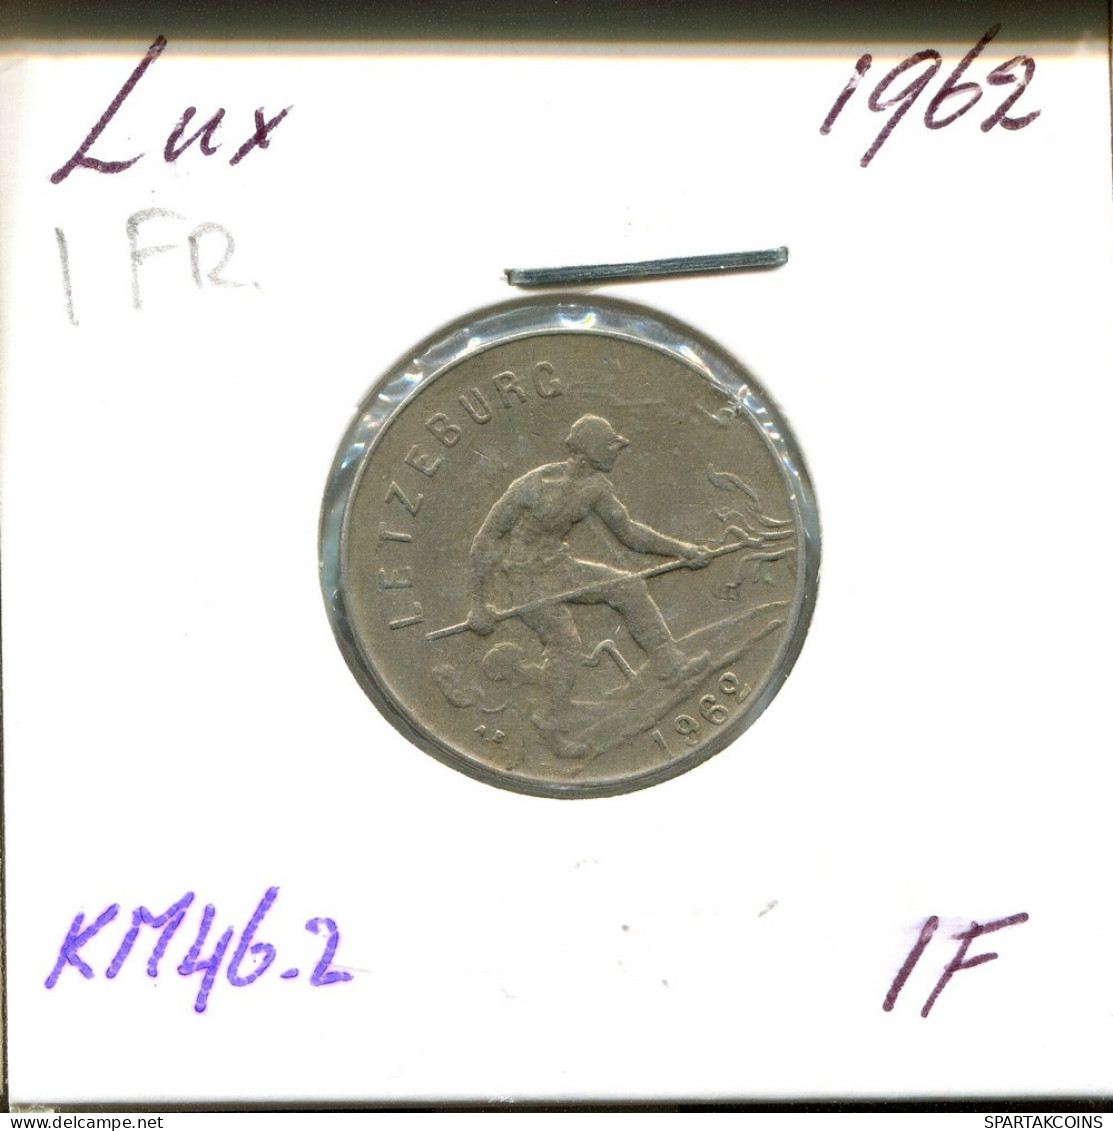 1 FRANC 1962 LUXEMBURG LUXEMBOURG Münze #AT204.D.A - Luxembourg